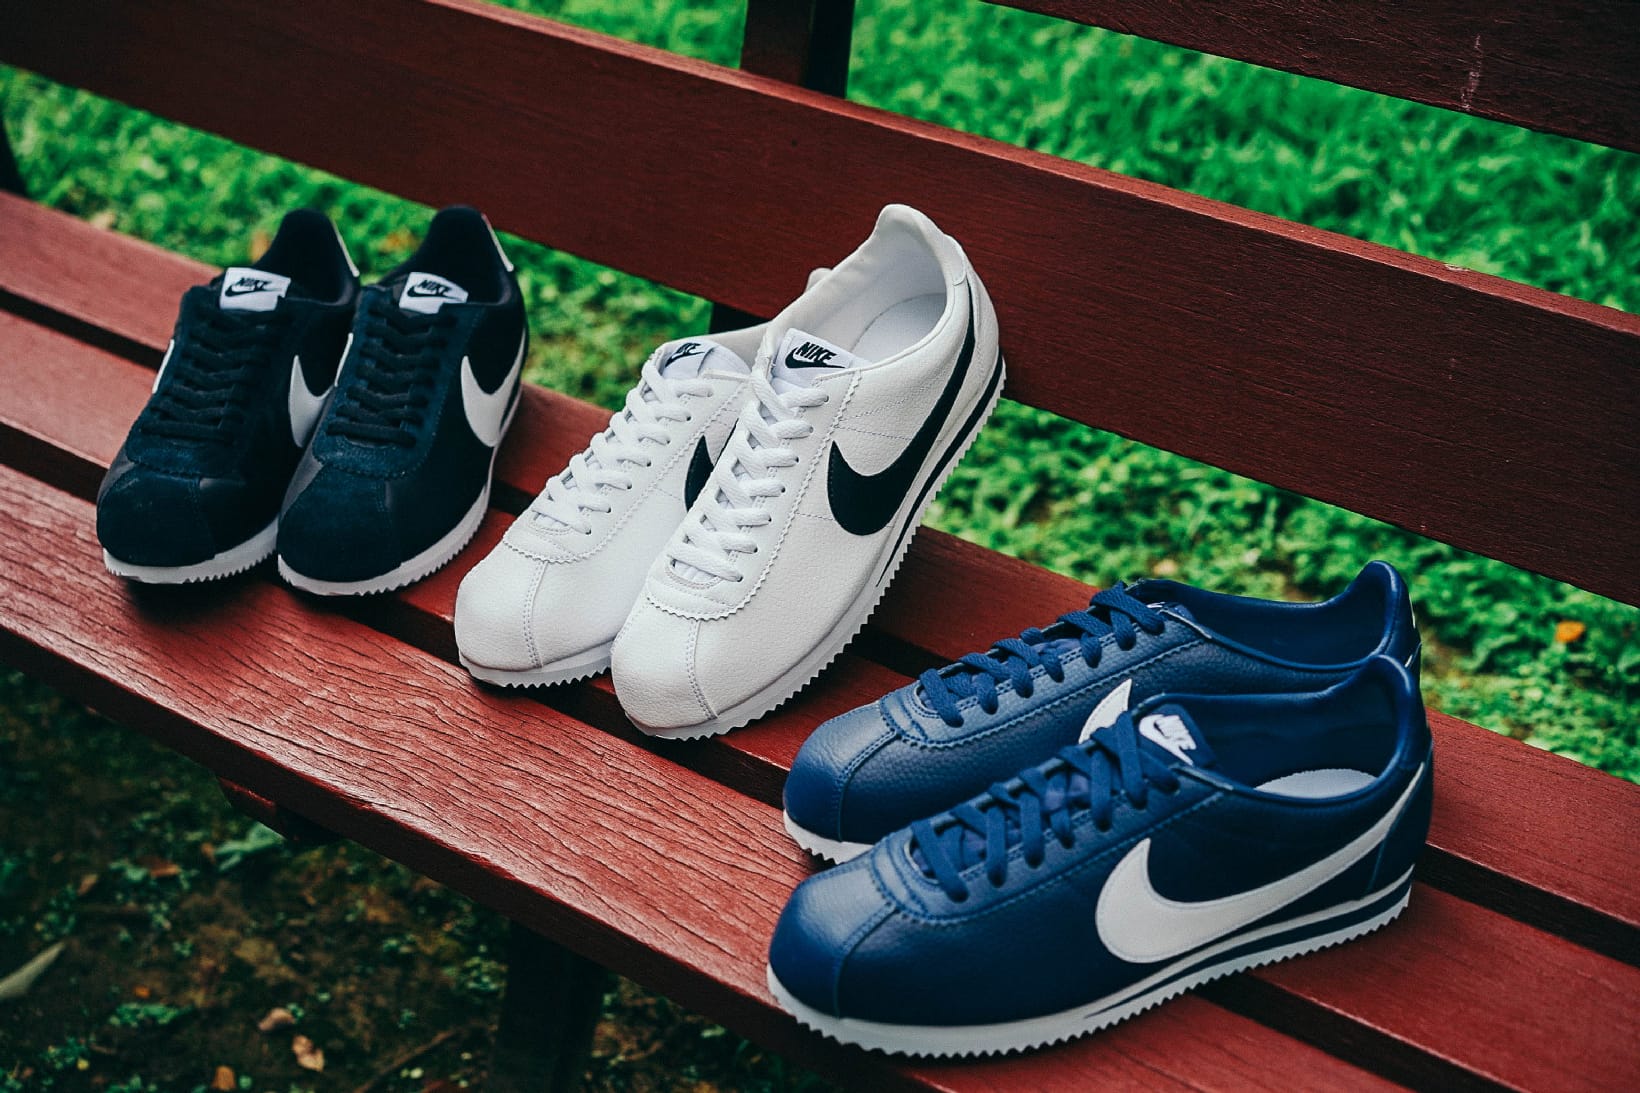 Nike Cortez Returns in Three Colors for 